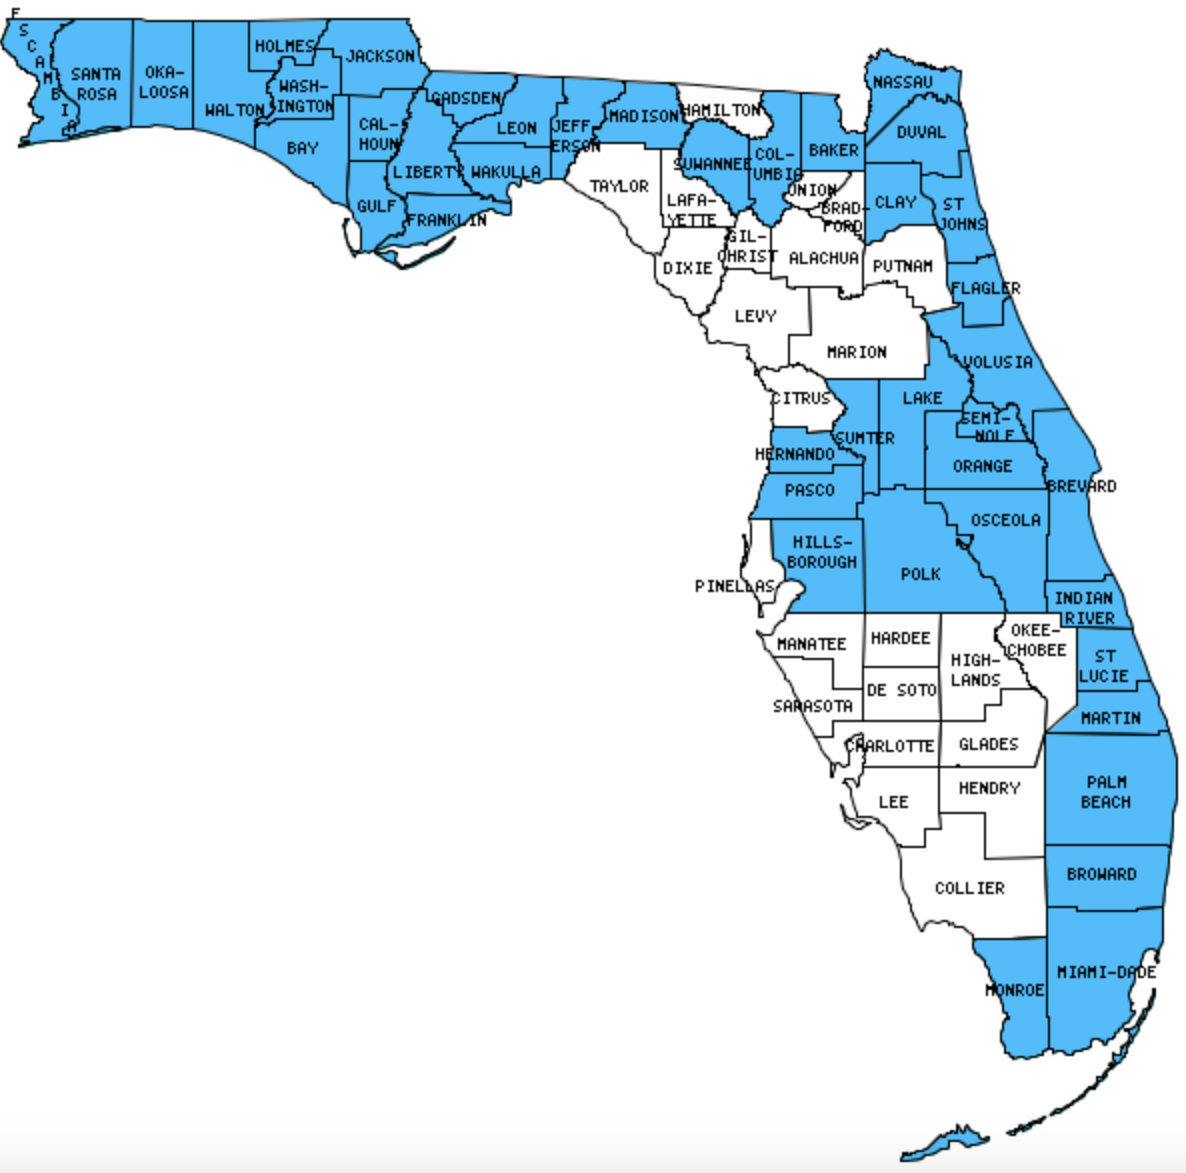 Florida Counties Visited